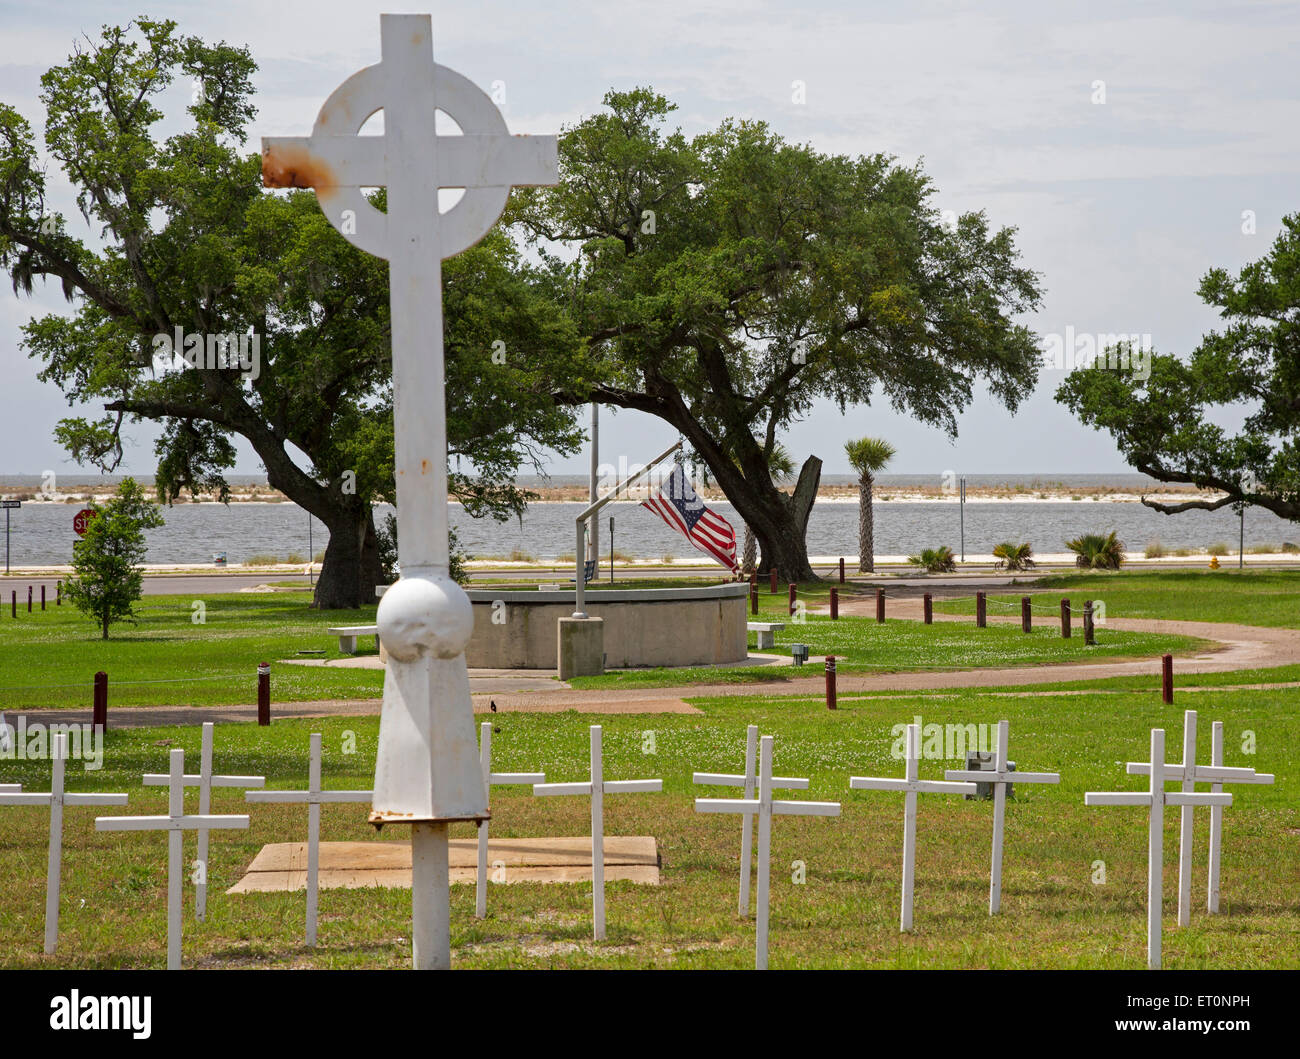 Biloxi, Mississippi - The former site of the Episcopal Church of the Redeemer which was destroyed by Hurricane Katrina. Stock Photo